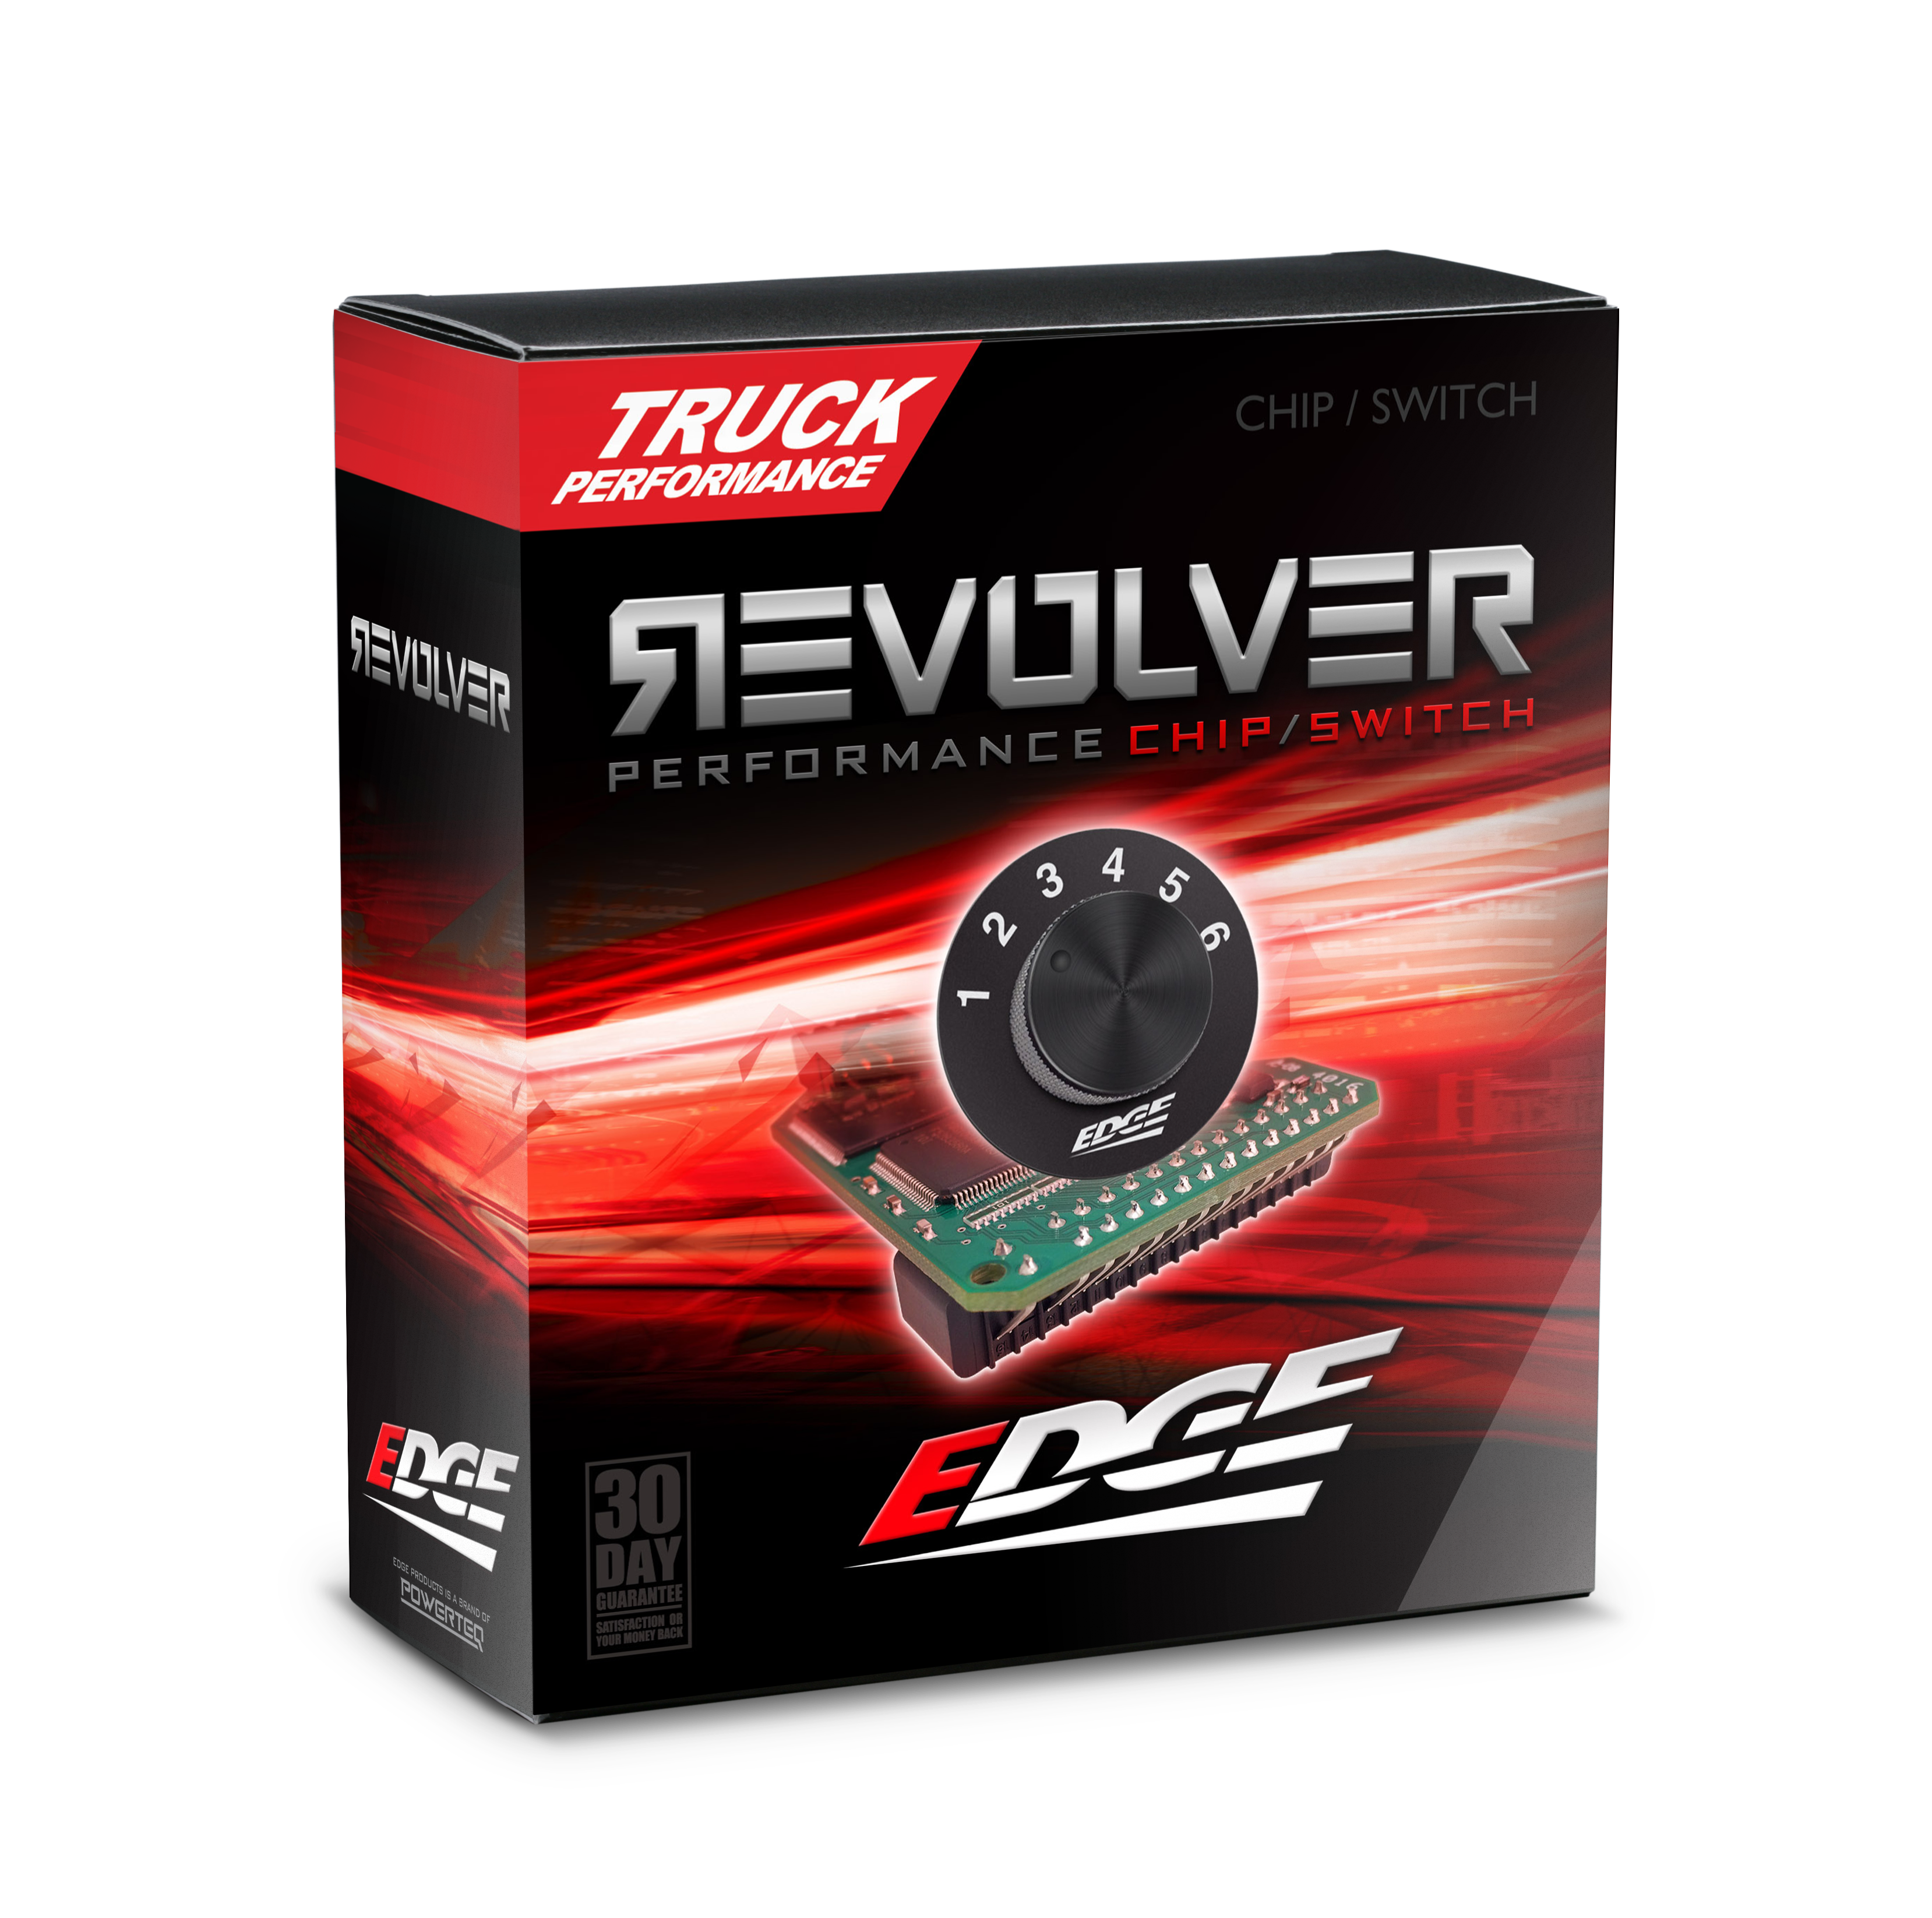 REVOLVER PERFORMANCE CHIP/SWITCH FORD 7.3L 99.5-01 Auto 6-Chip Master Box Code NVK4